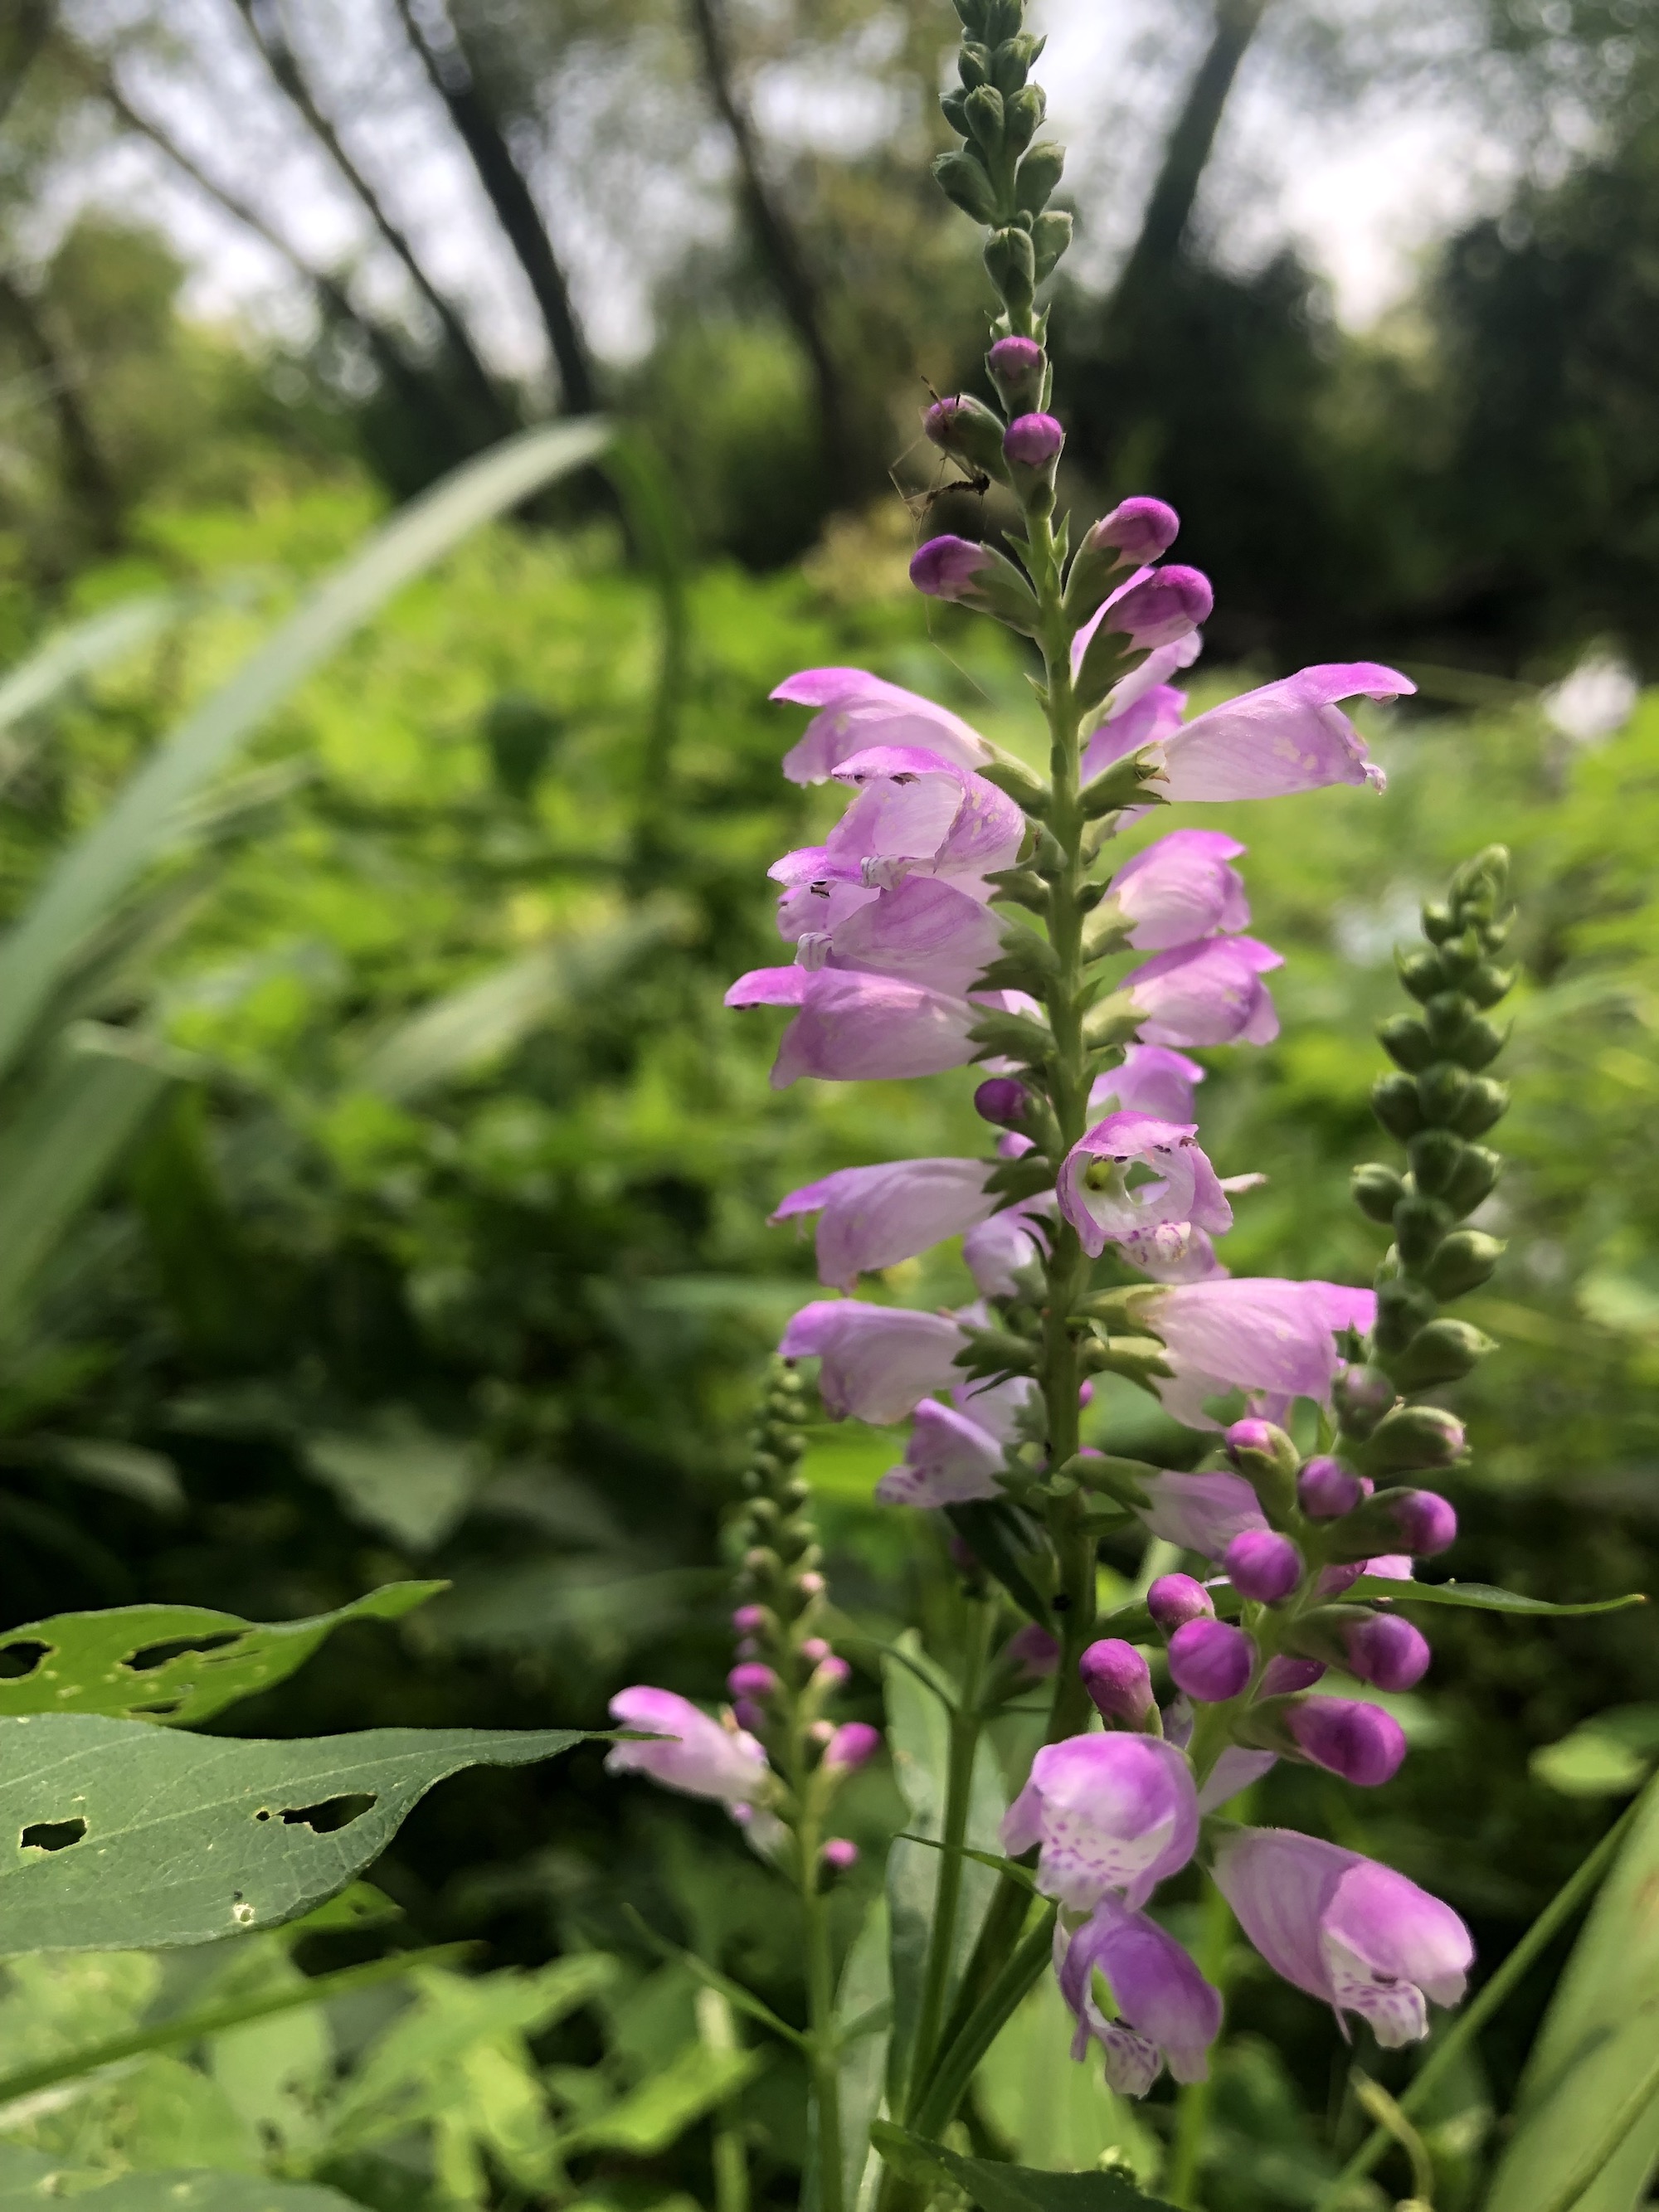 Obedient Plant at source of Dancing Sands spring in Madison, Wisconsin on August 3, 2021.